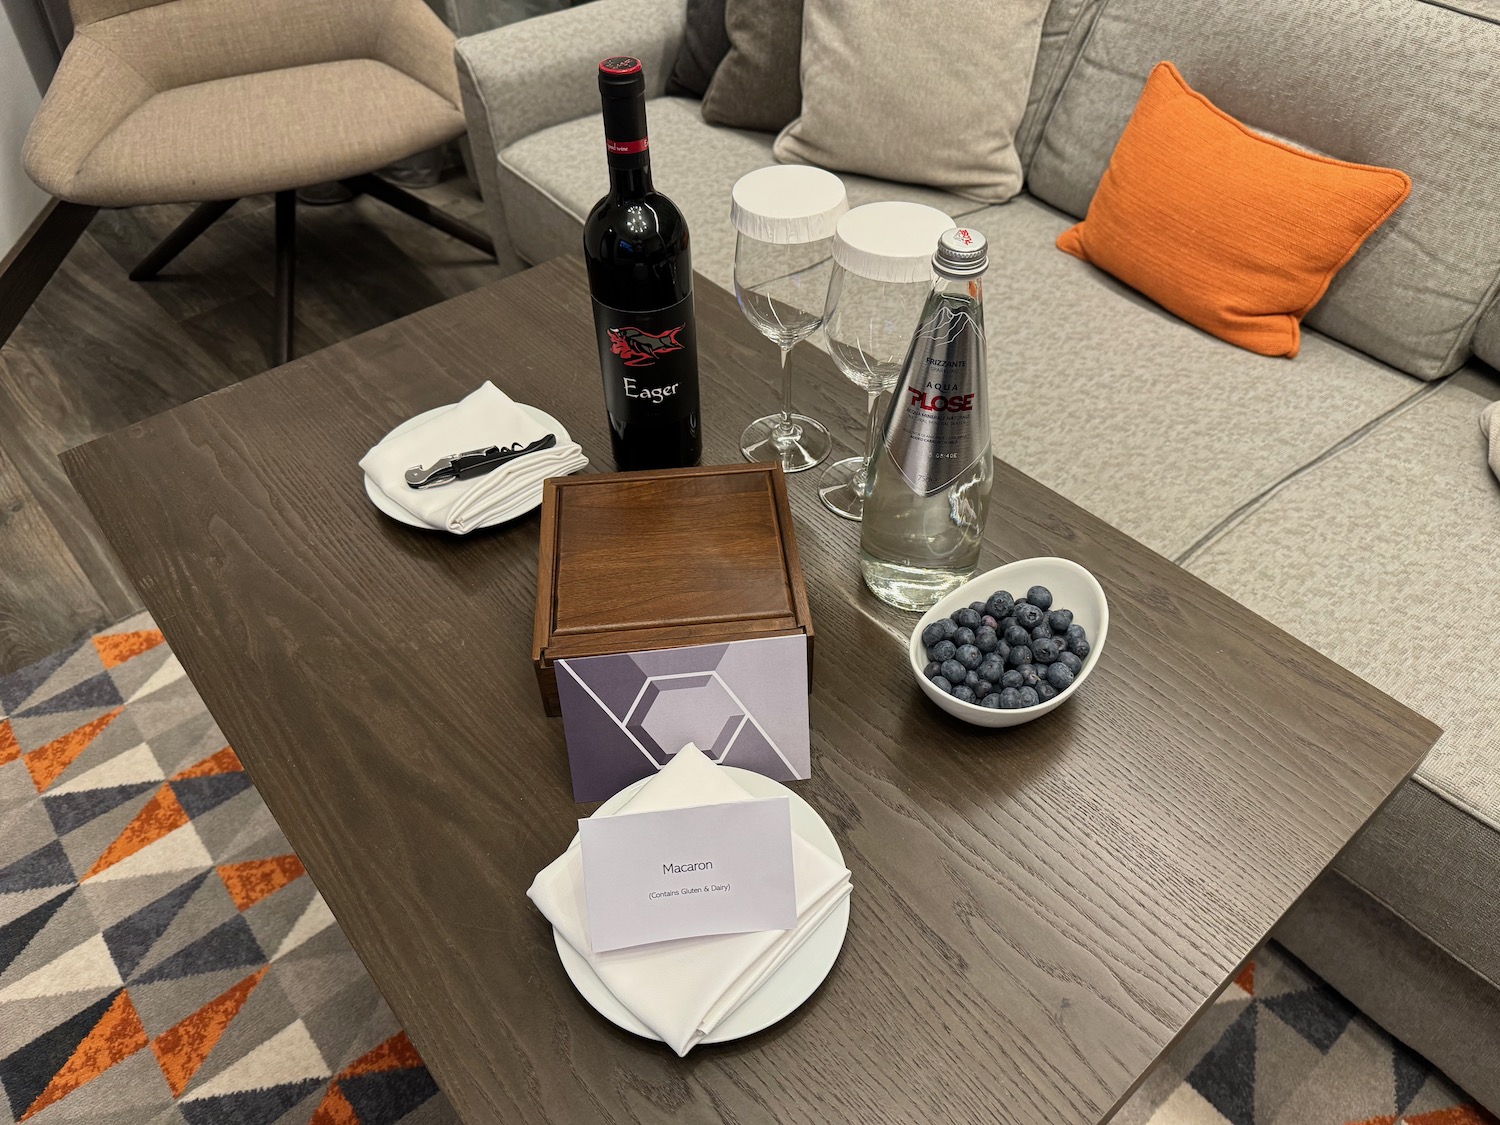 a table with wine bottles and glasses on it